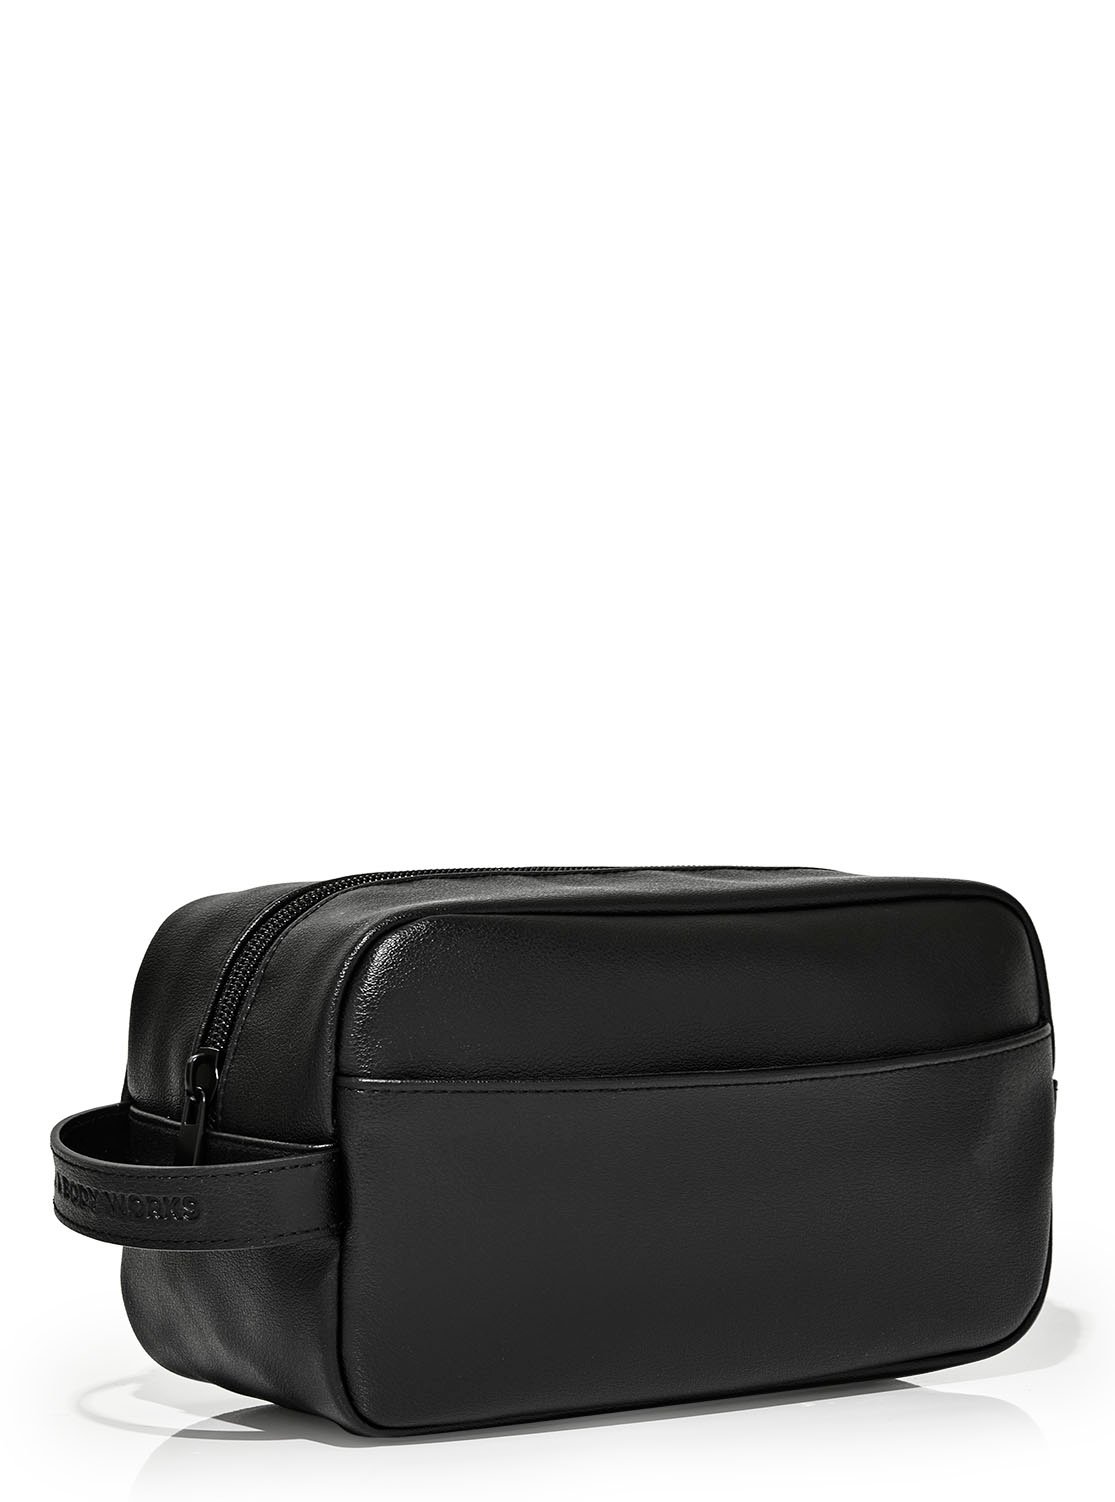 Black Travel Toiletry Bag | Bath and Body Works